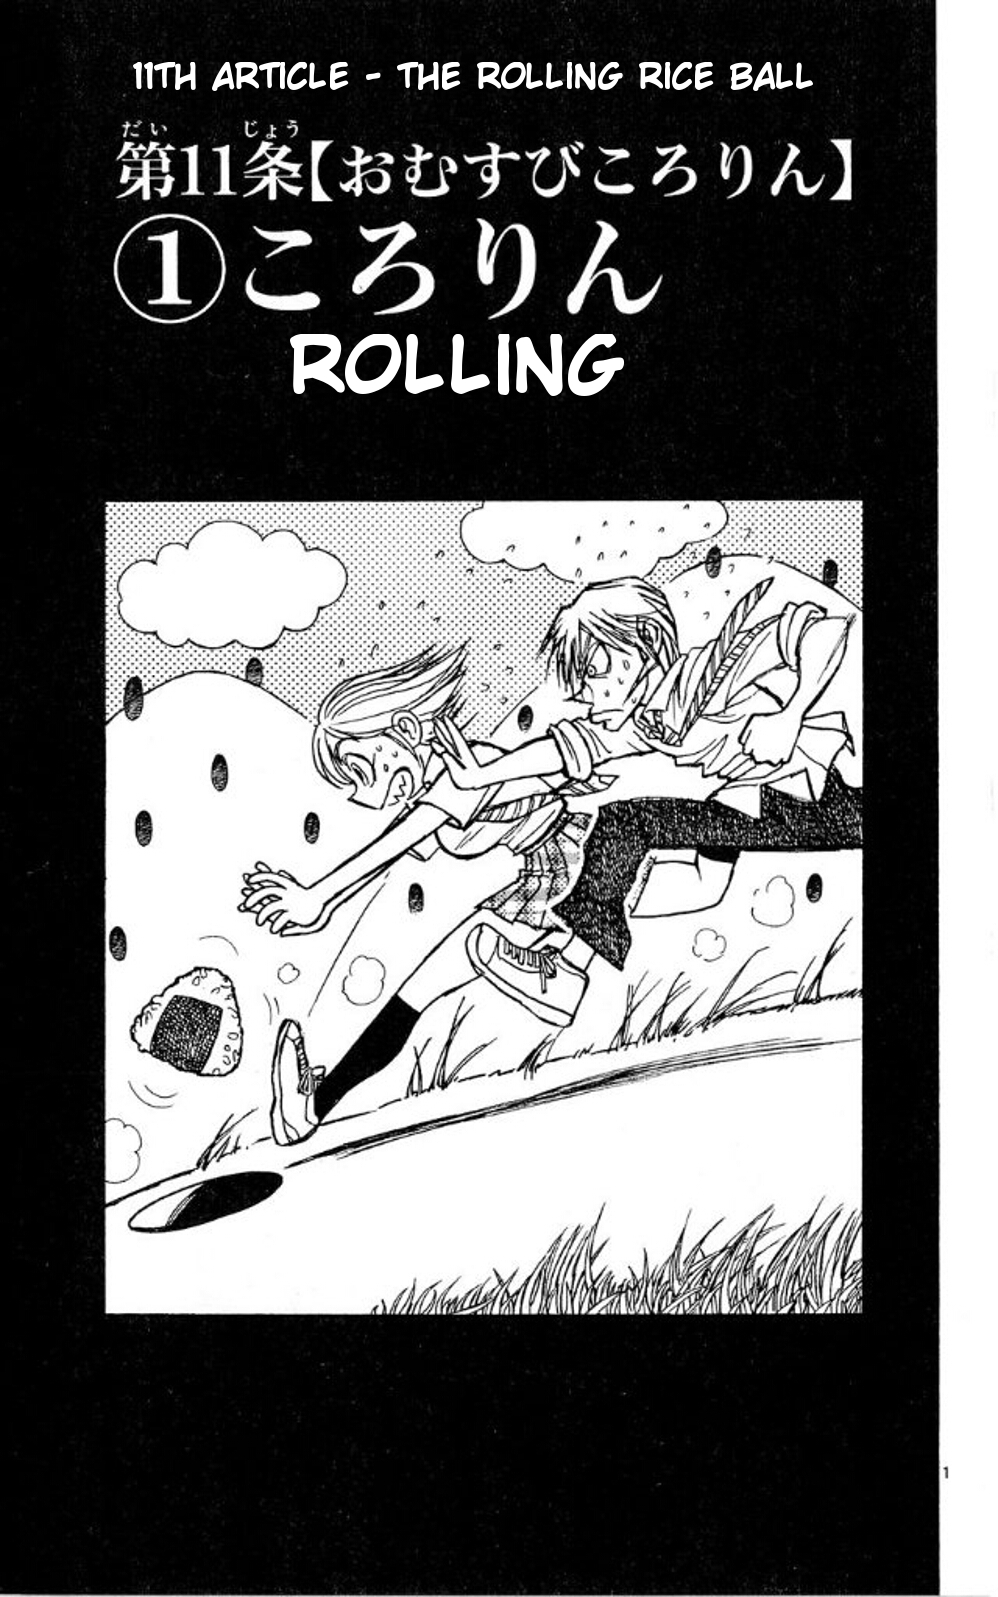 Moonlight Act Vol. 5 Ch. 40 11th Article The Rolling Riceball